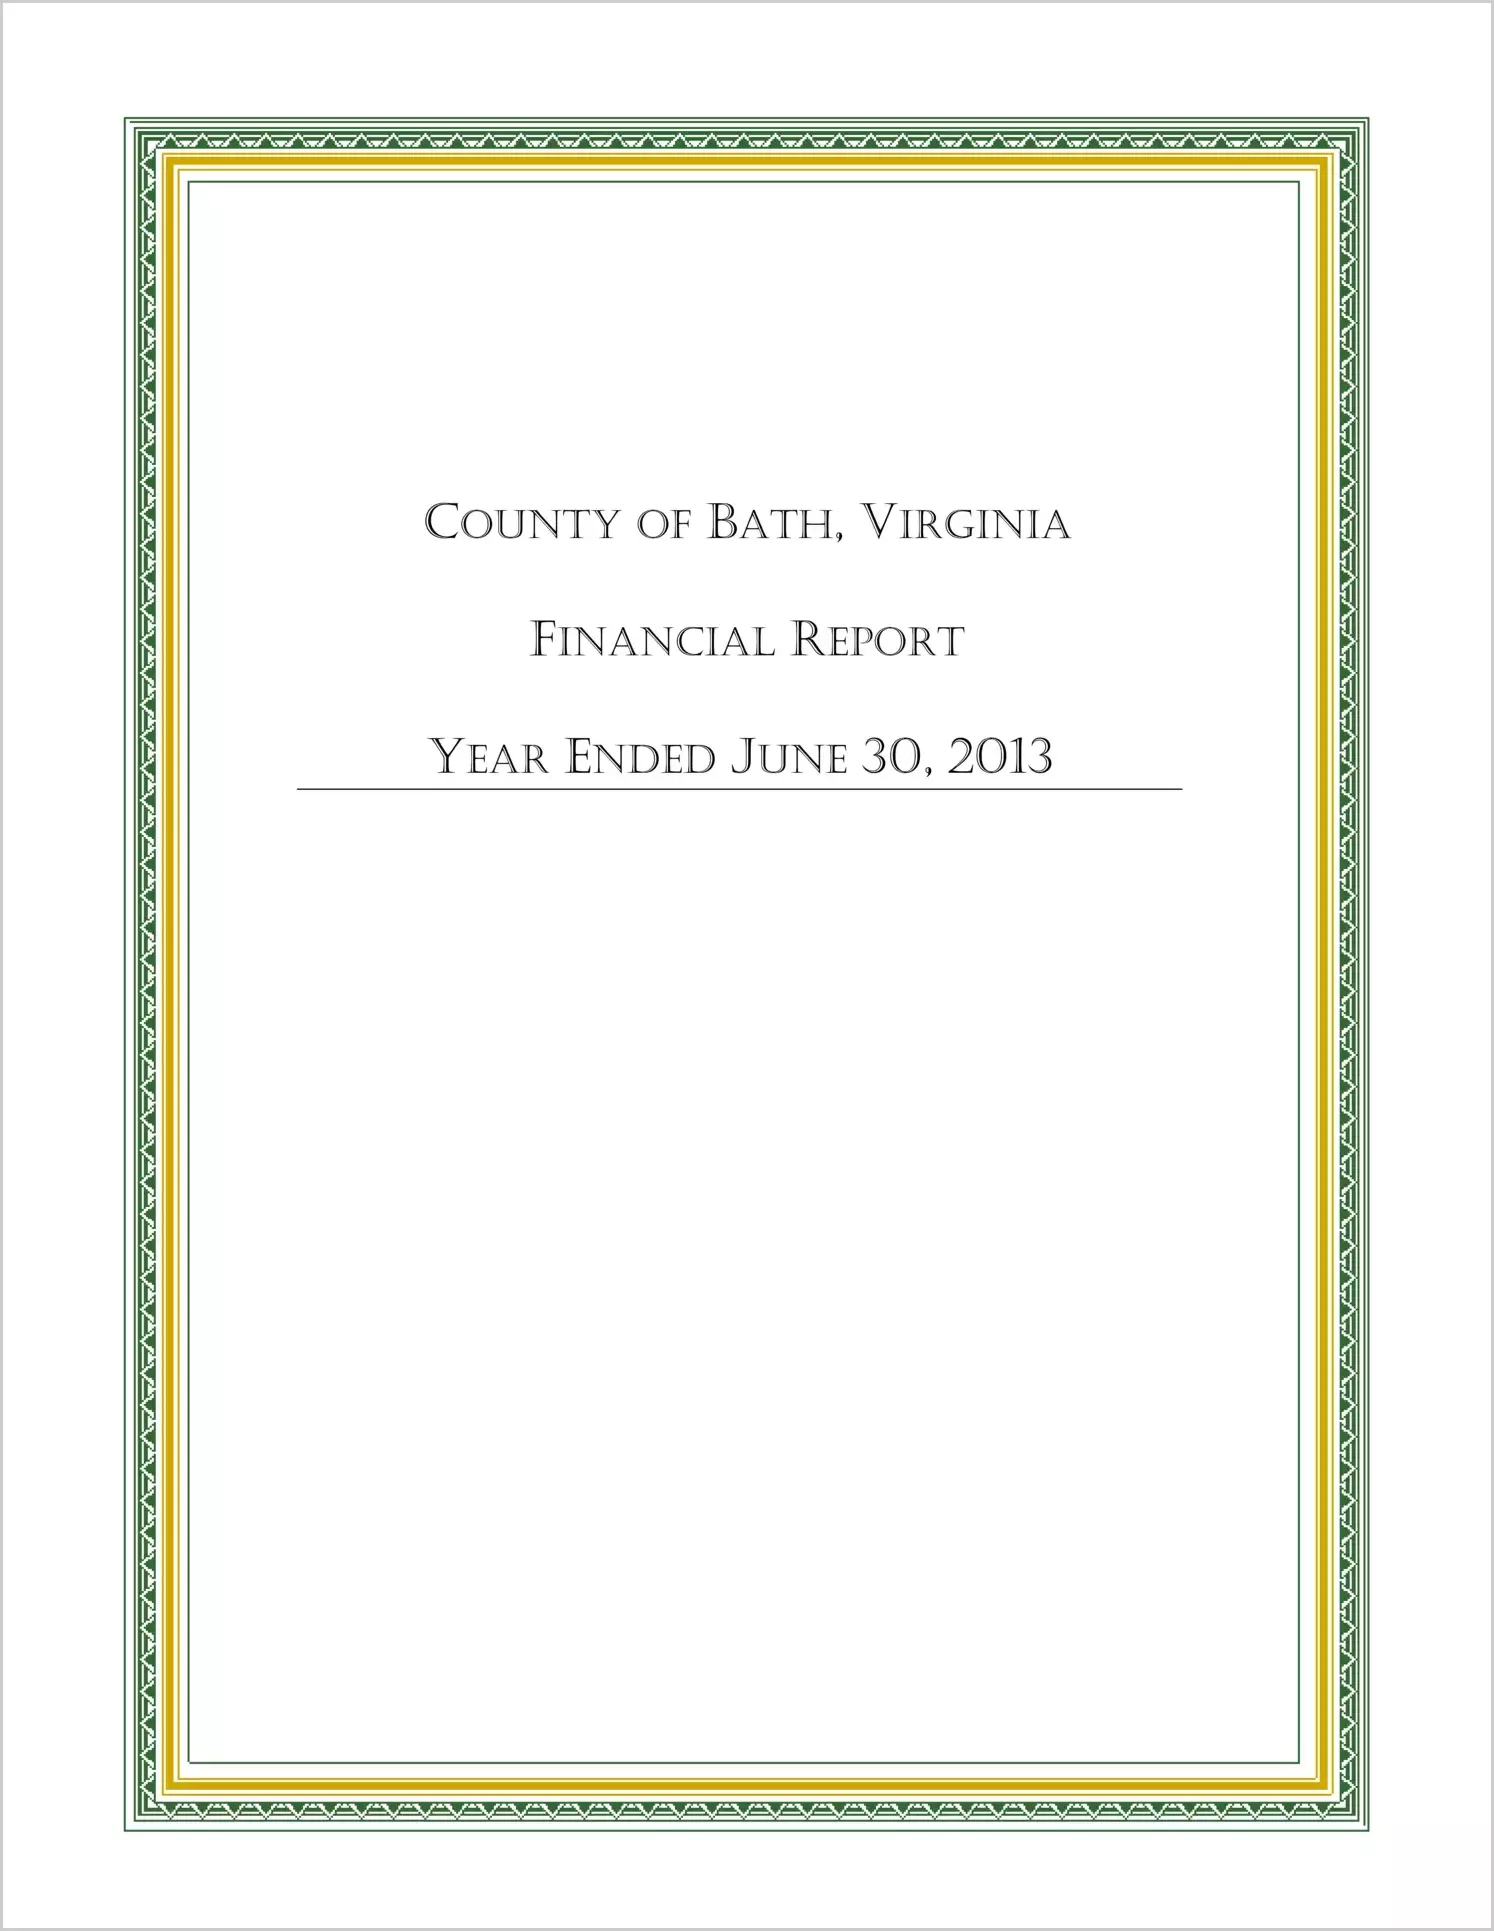 2013 Annual Financial Report for County of Bath